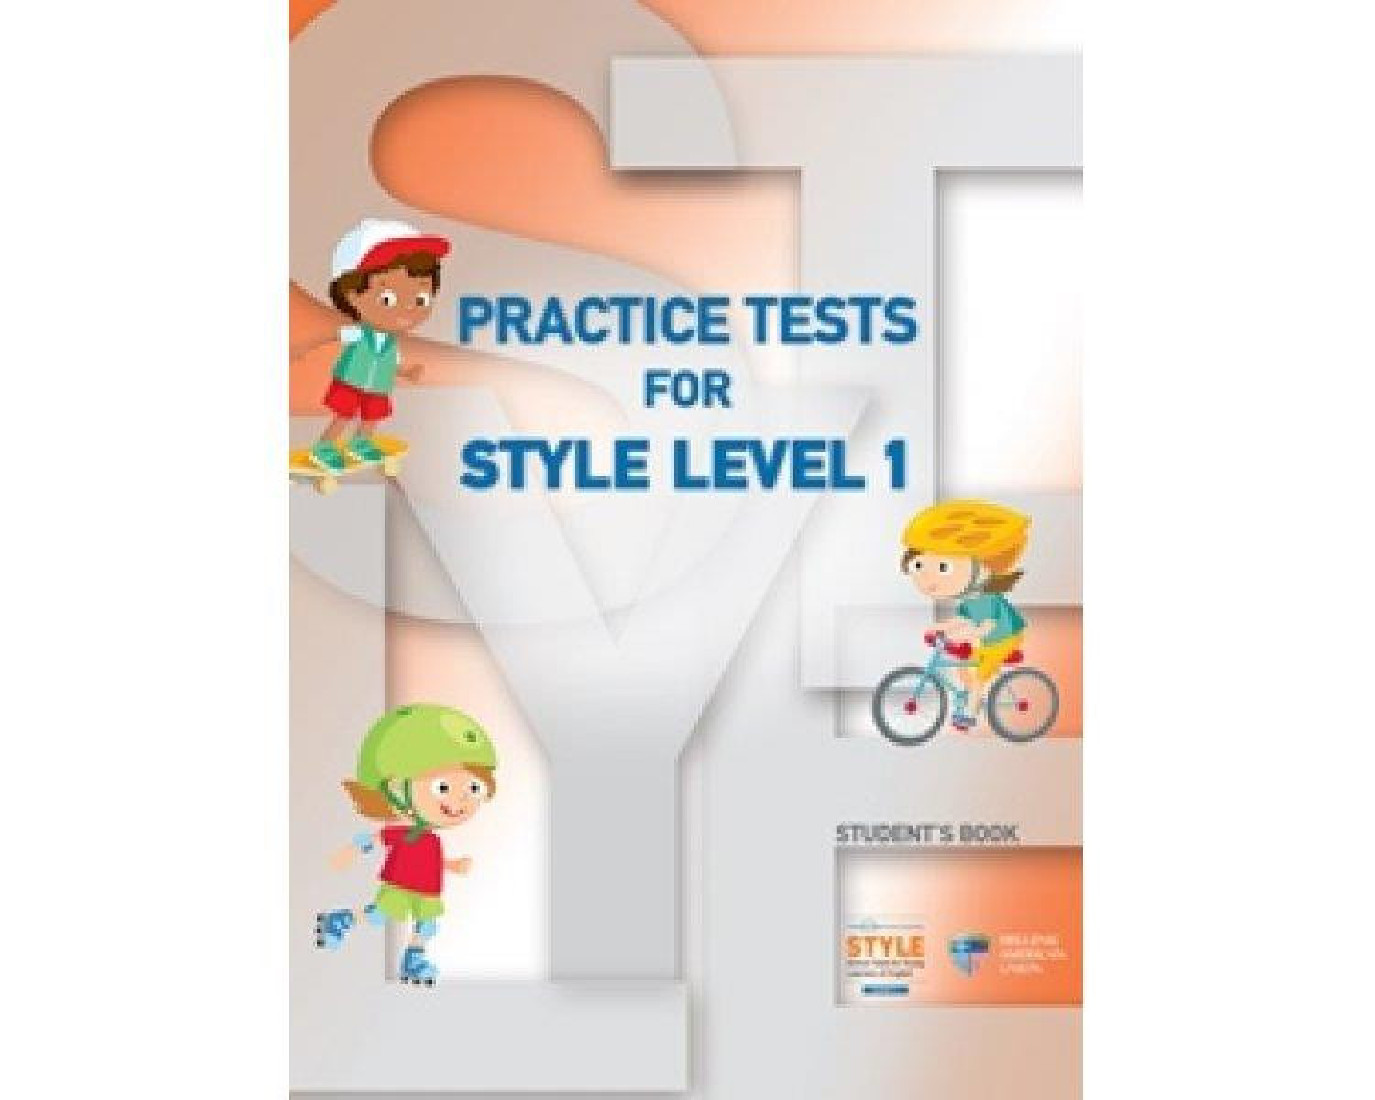 PRACTICE TESTS FOR STYLE LEVEL 1 SB